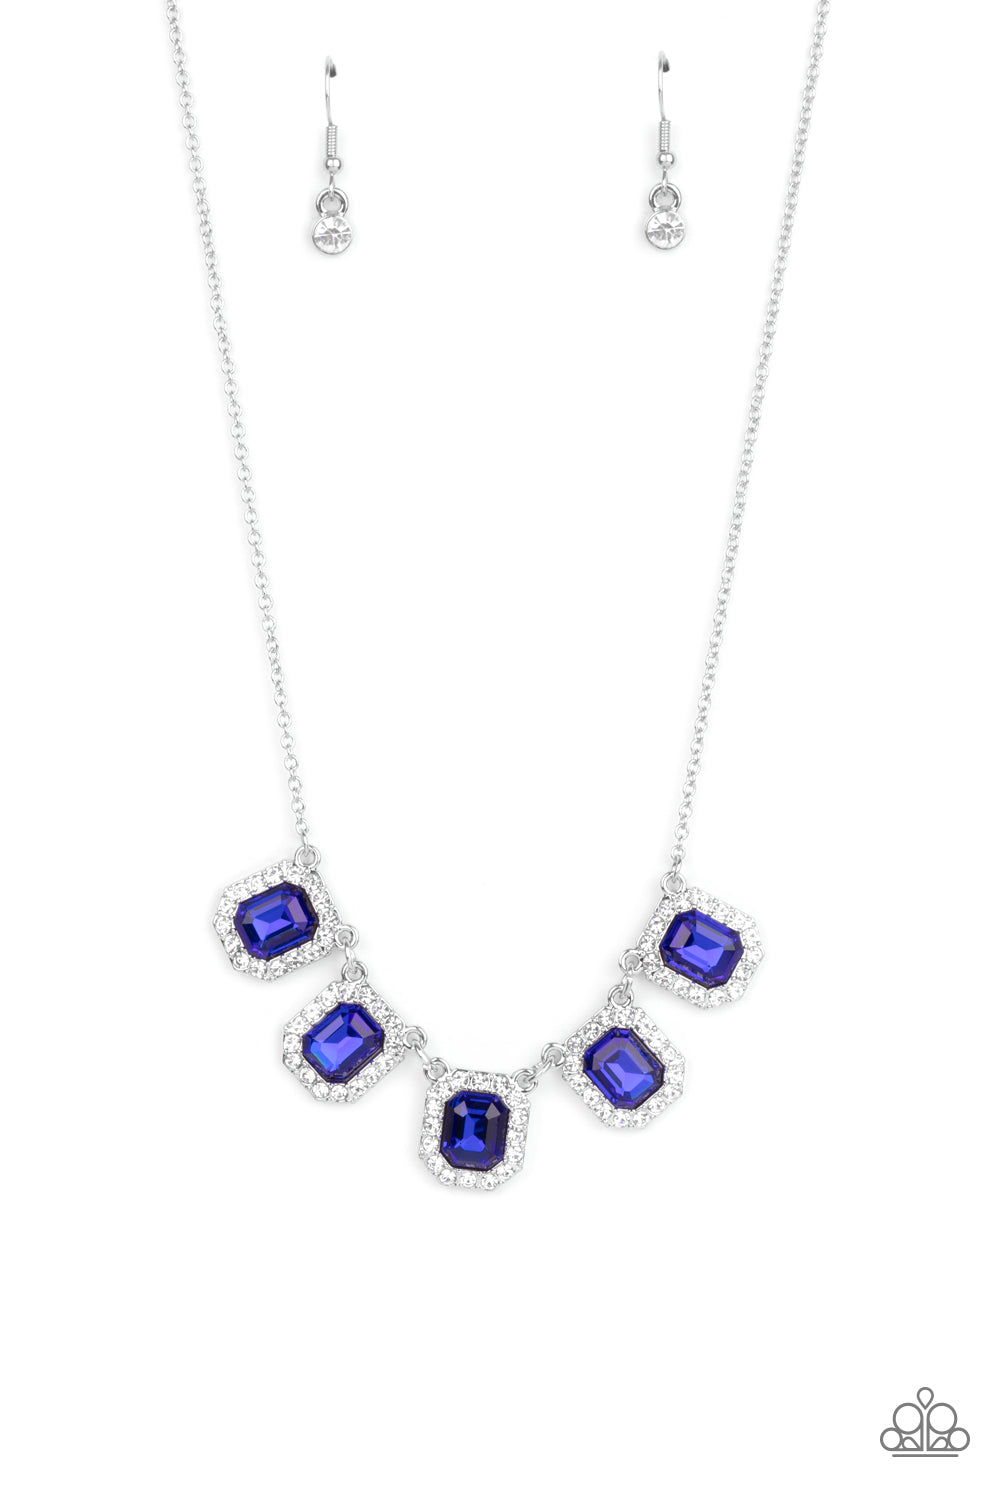 Next Level Luster - Blue ***COMING SOON*** - Bling With Crystal